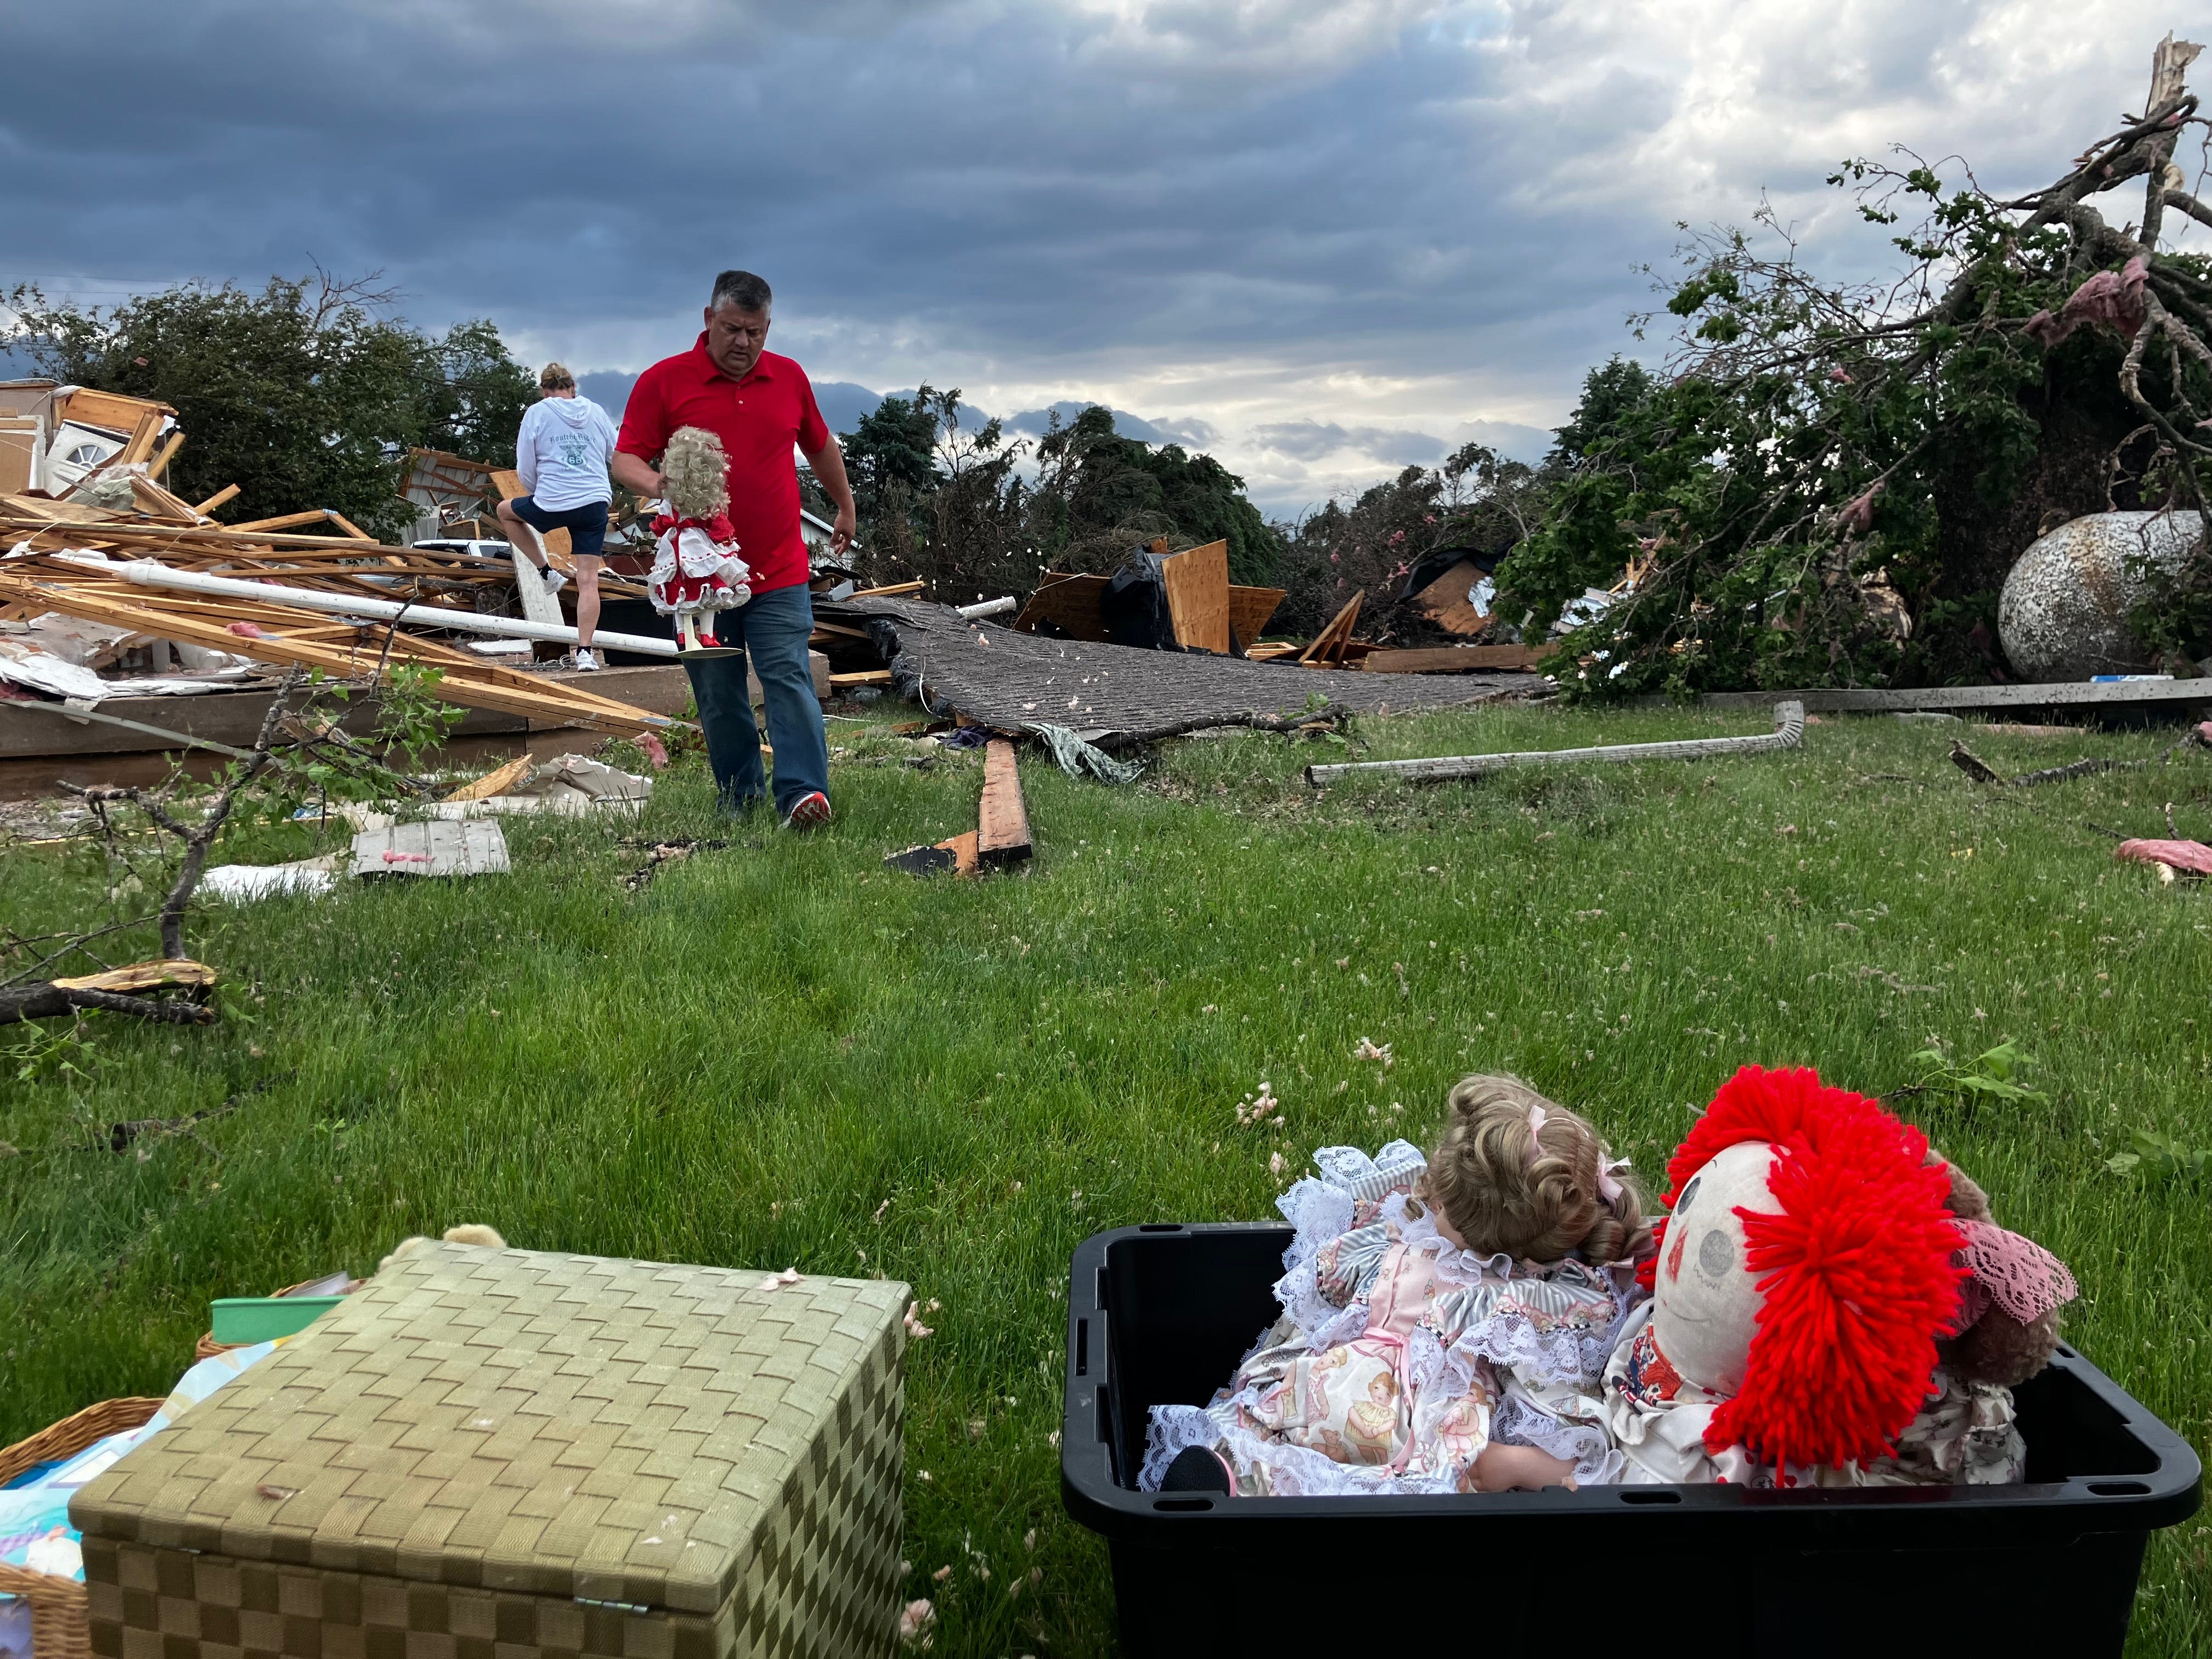 Reports of damage, deaths come in after tornadoes touch down in Iowa